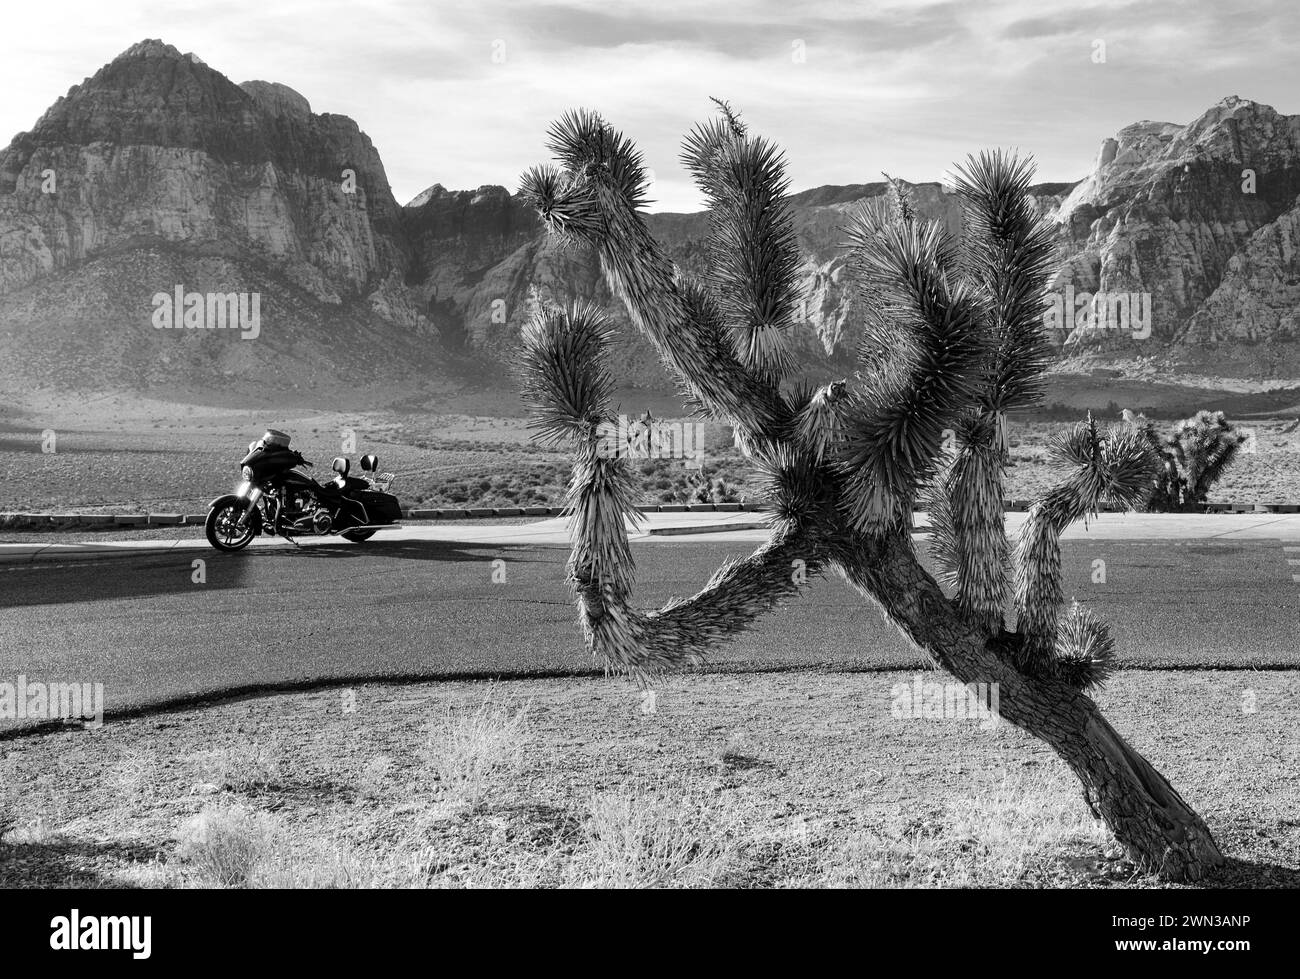 Desert Landscape with motorcycle, mountains and a joshua tree in Red Rocks Park, near Las Vegas, Nevada Stock Photo